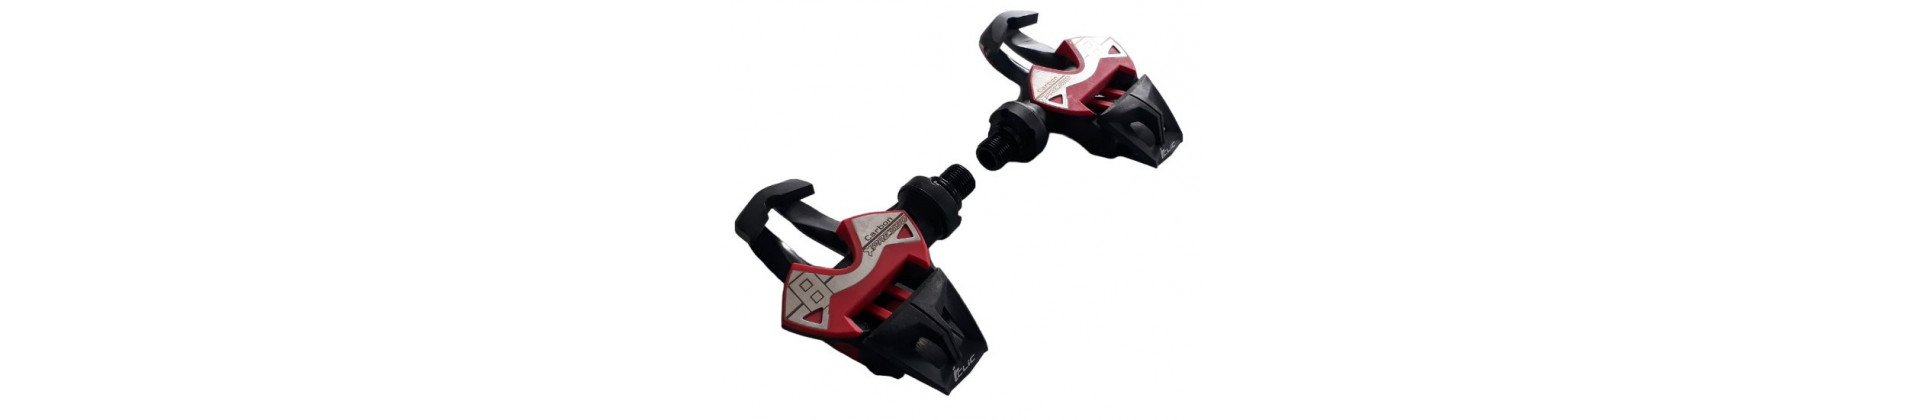 Time trial bike pedals